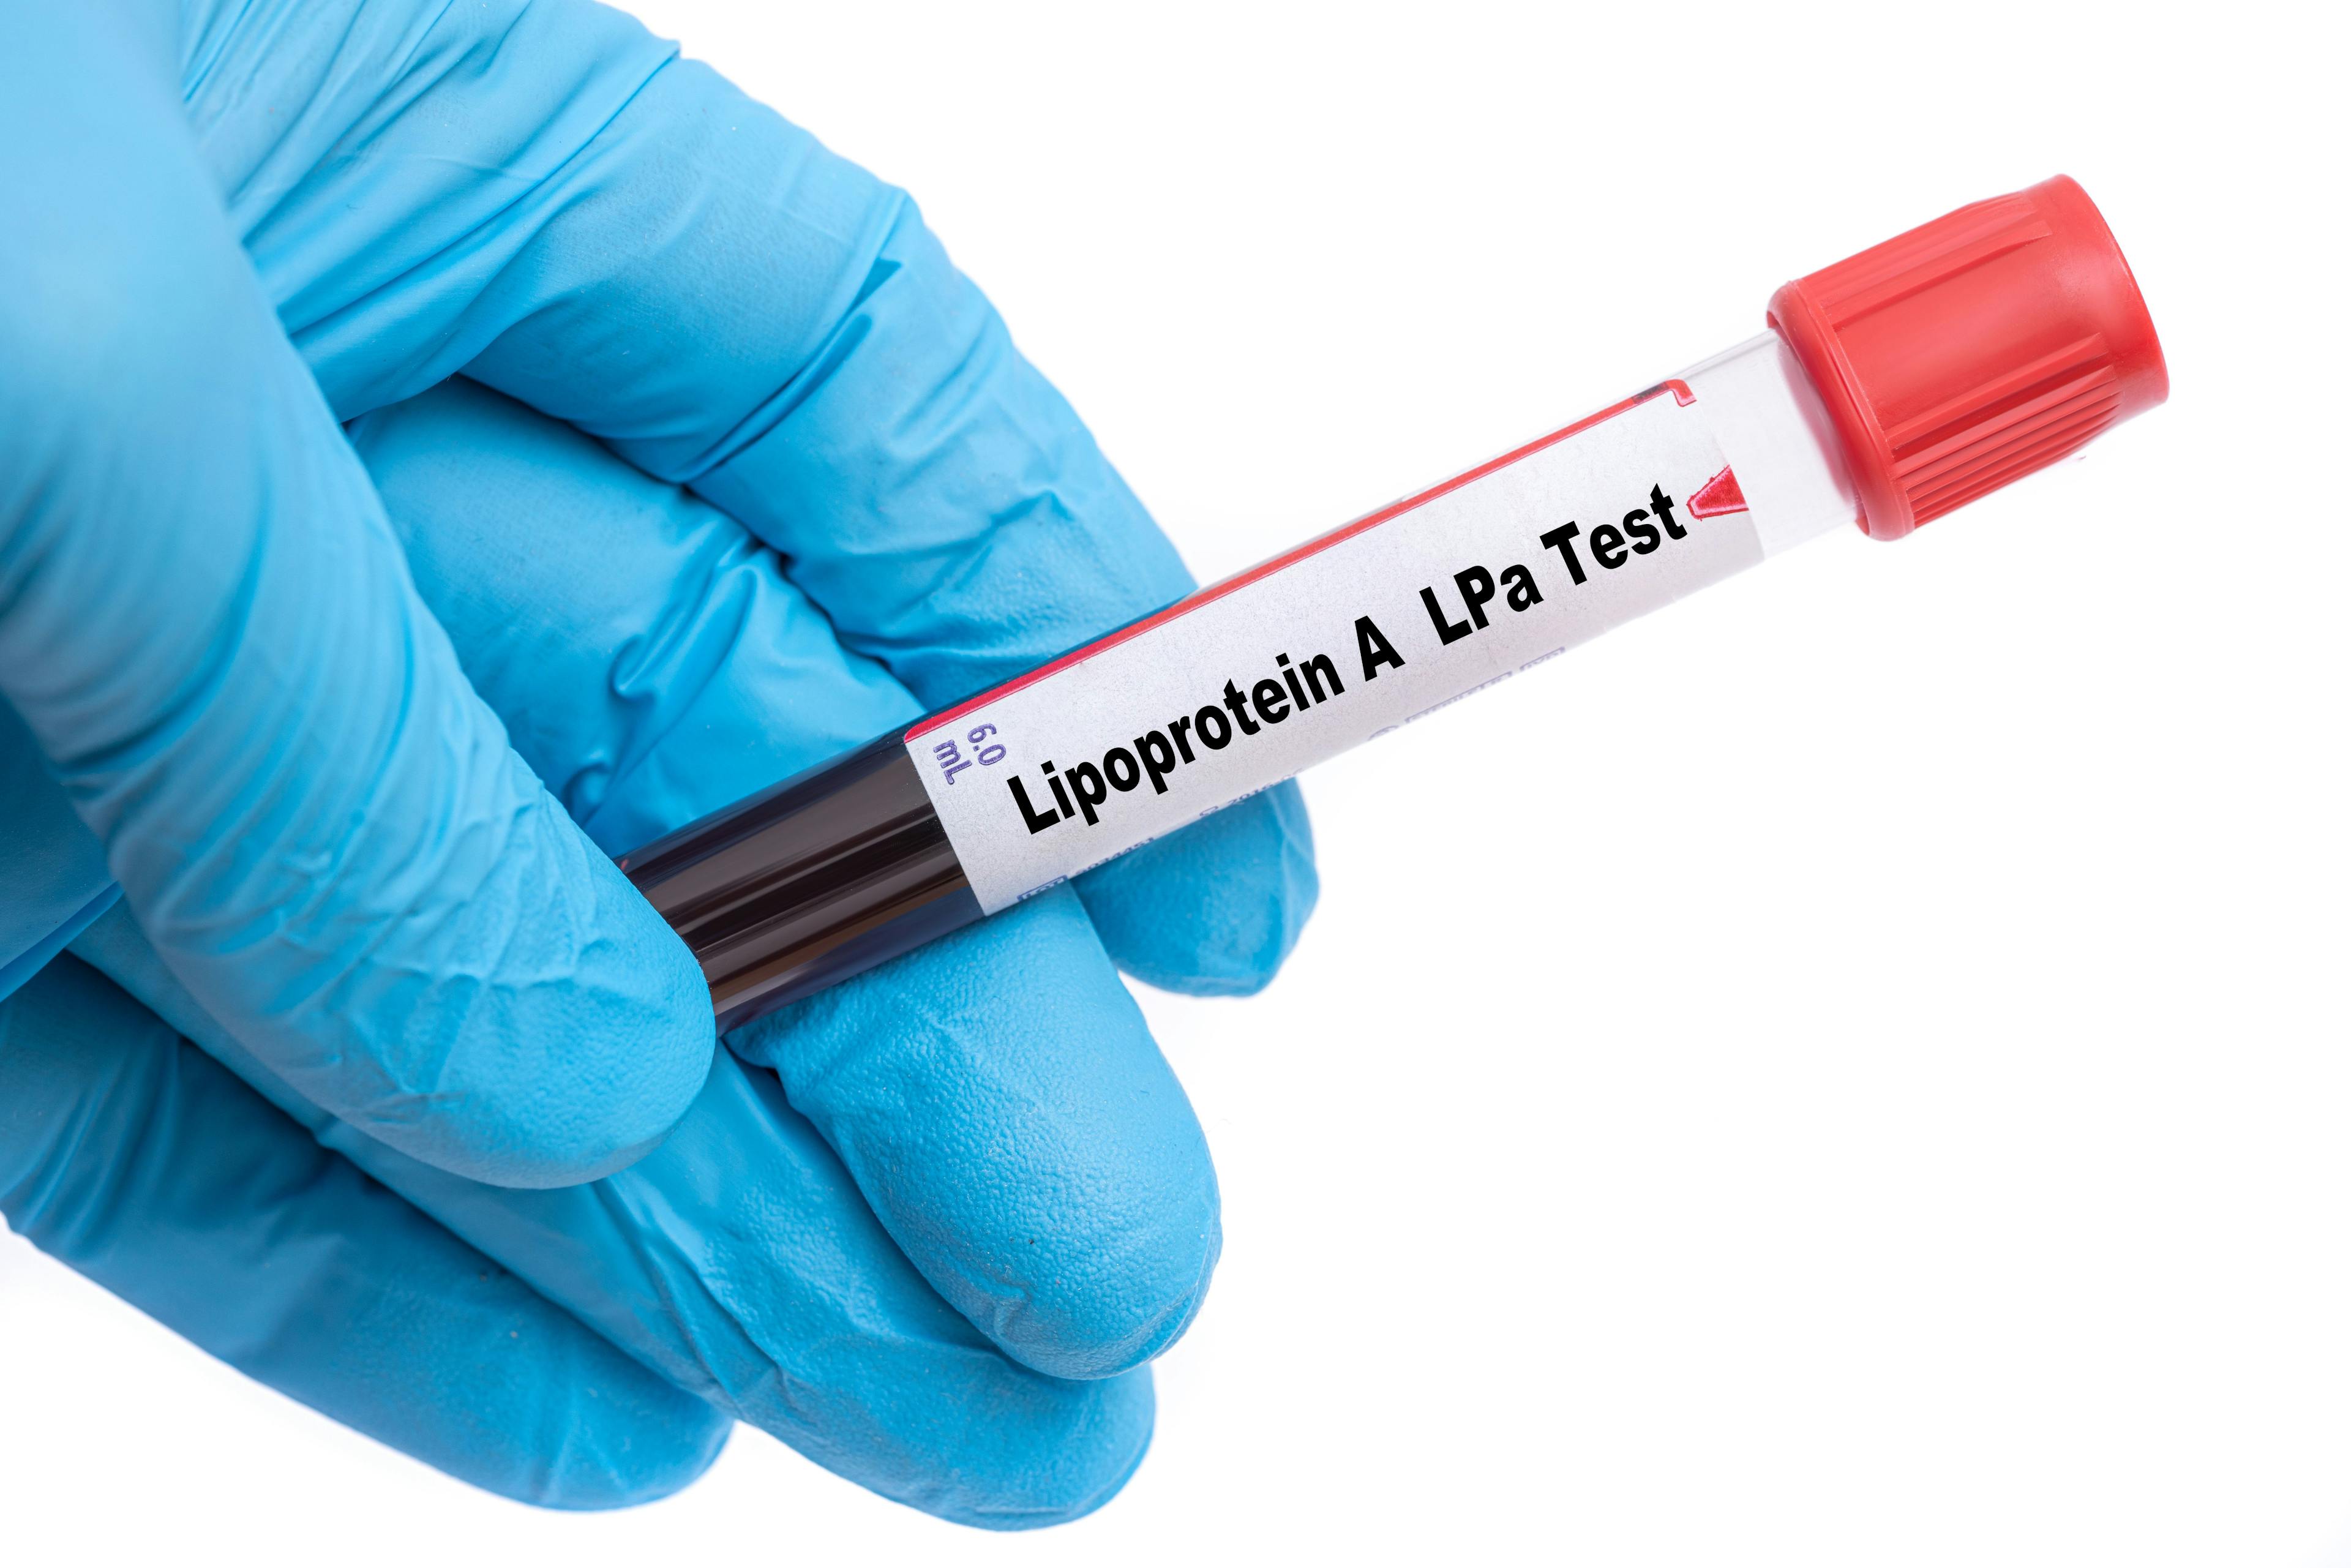 Lipoprotein A LPa Test Medical check up test tube with biological sample